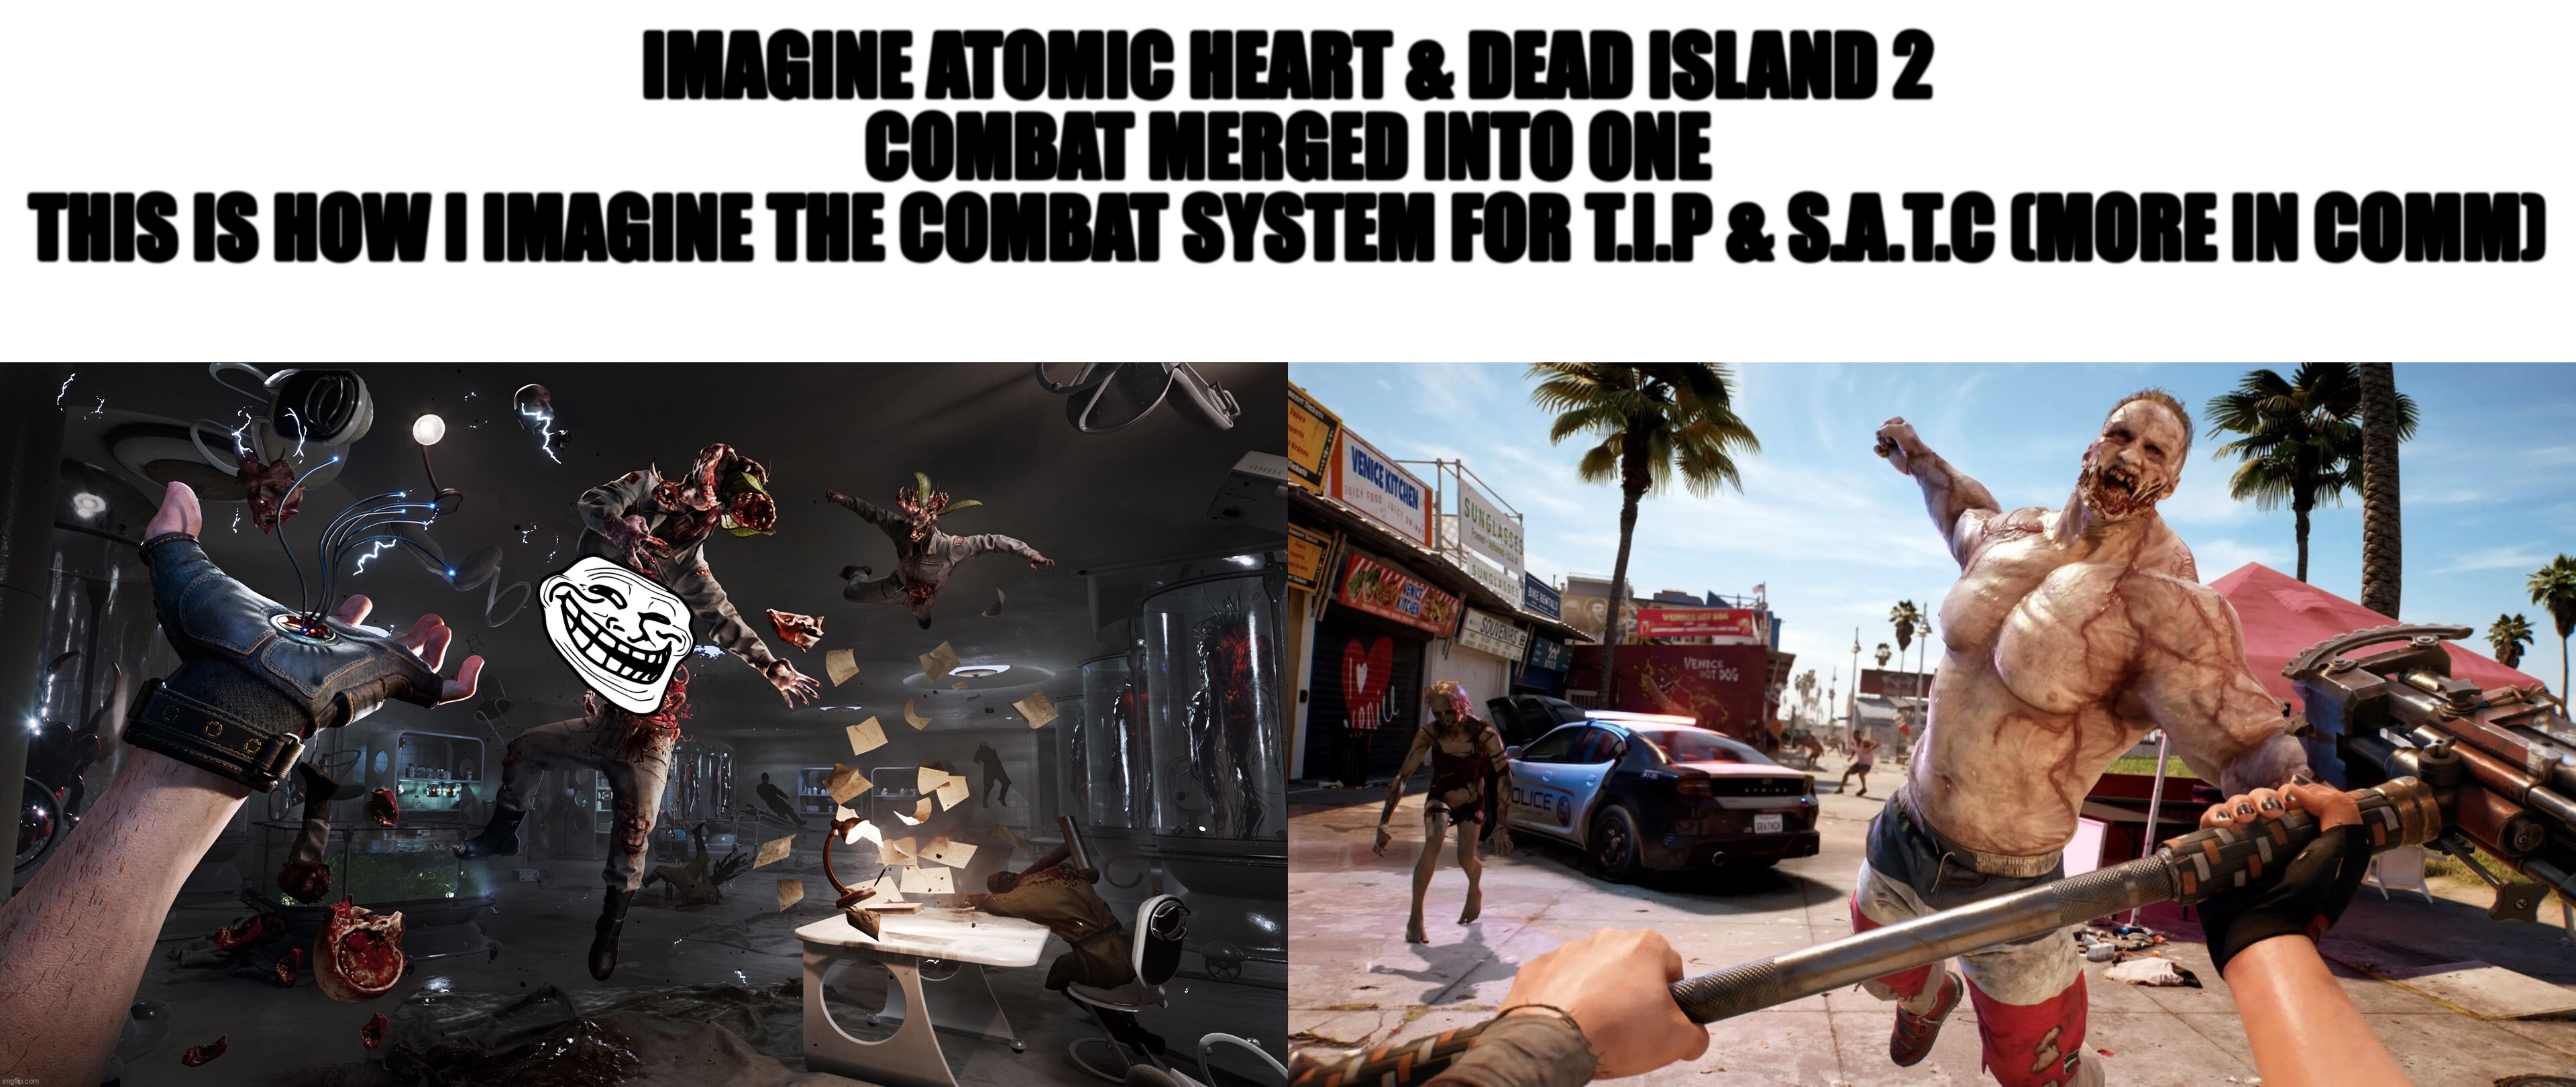 Concept Log #1 "Combat" | IMAGINE ATOMIC HEART & DEAD ISLAND 2 COMBAT MERGED INTO ONE
THIS IS HOW I IMAGINE THE COMBAT SYSTEM FOR T.I.P & S.A.T.C (MORE IN COMM) | image tagged in murder drones,smg4,glitch gameverse,glitch productions,combat | made w/ Imgflip meme maker